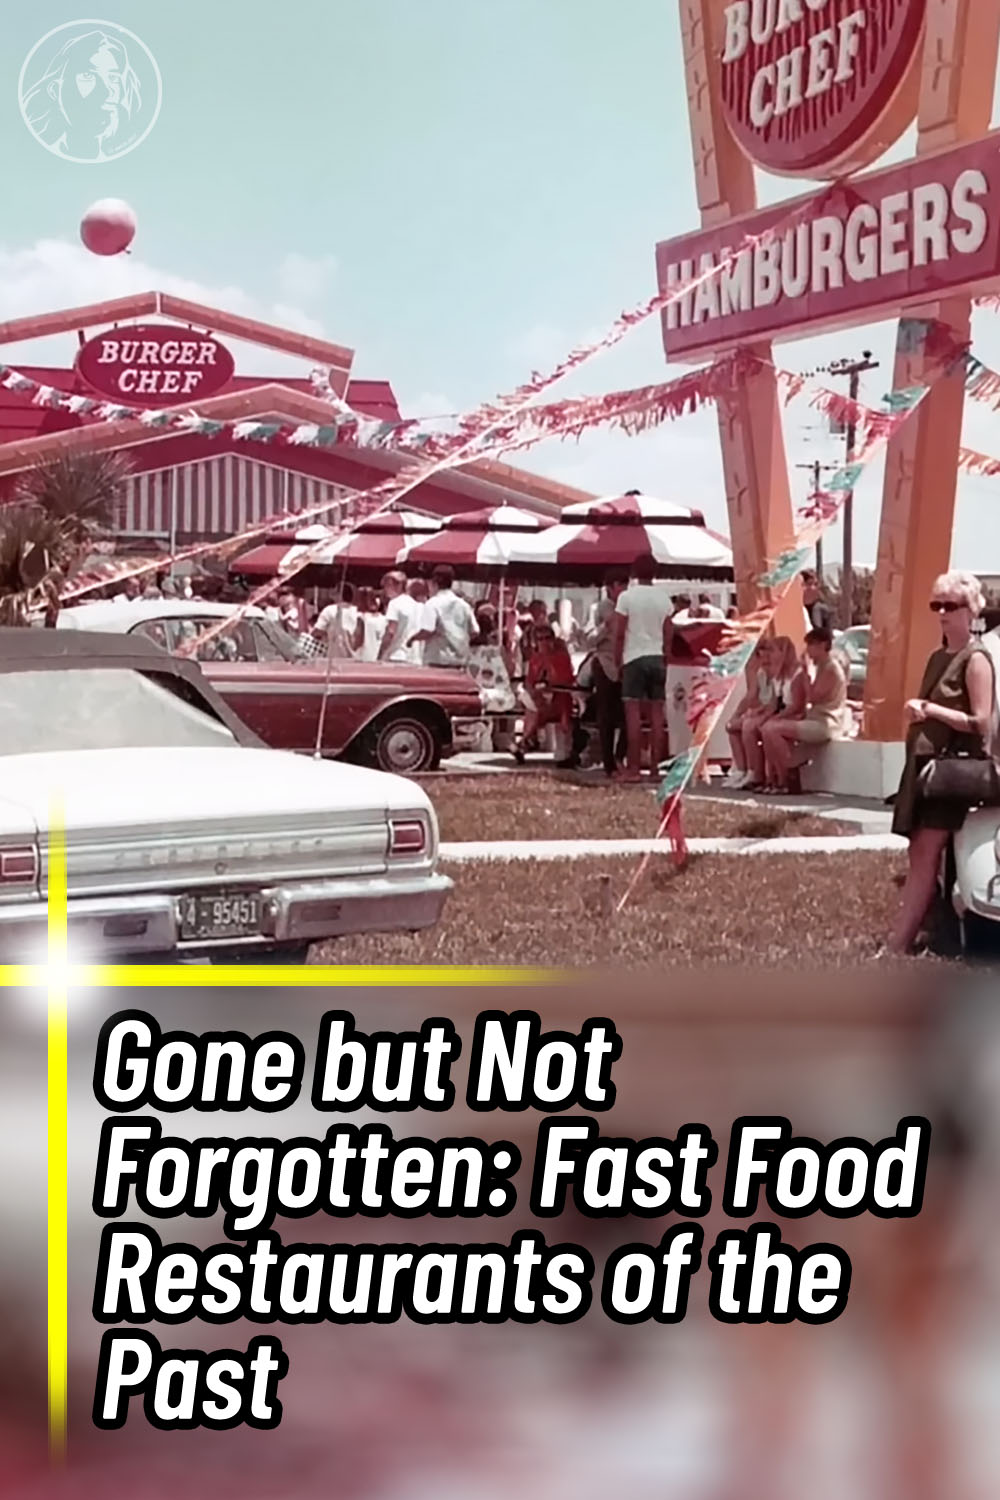 Gone but Not Forgotten: Fast Food Restaurants of the Past